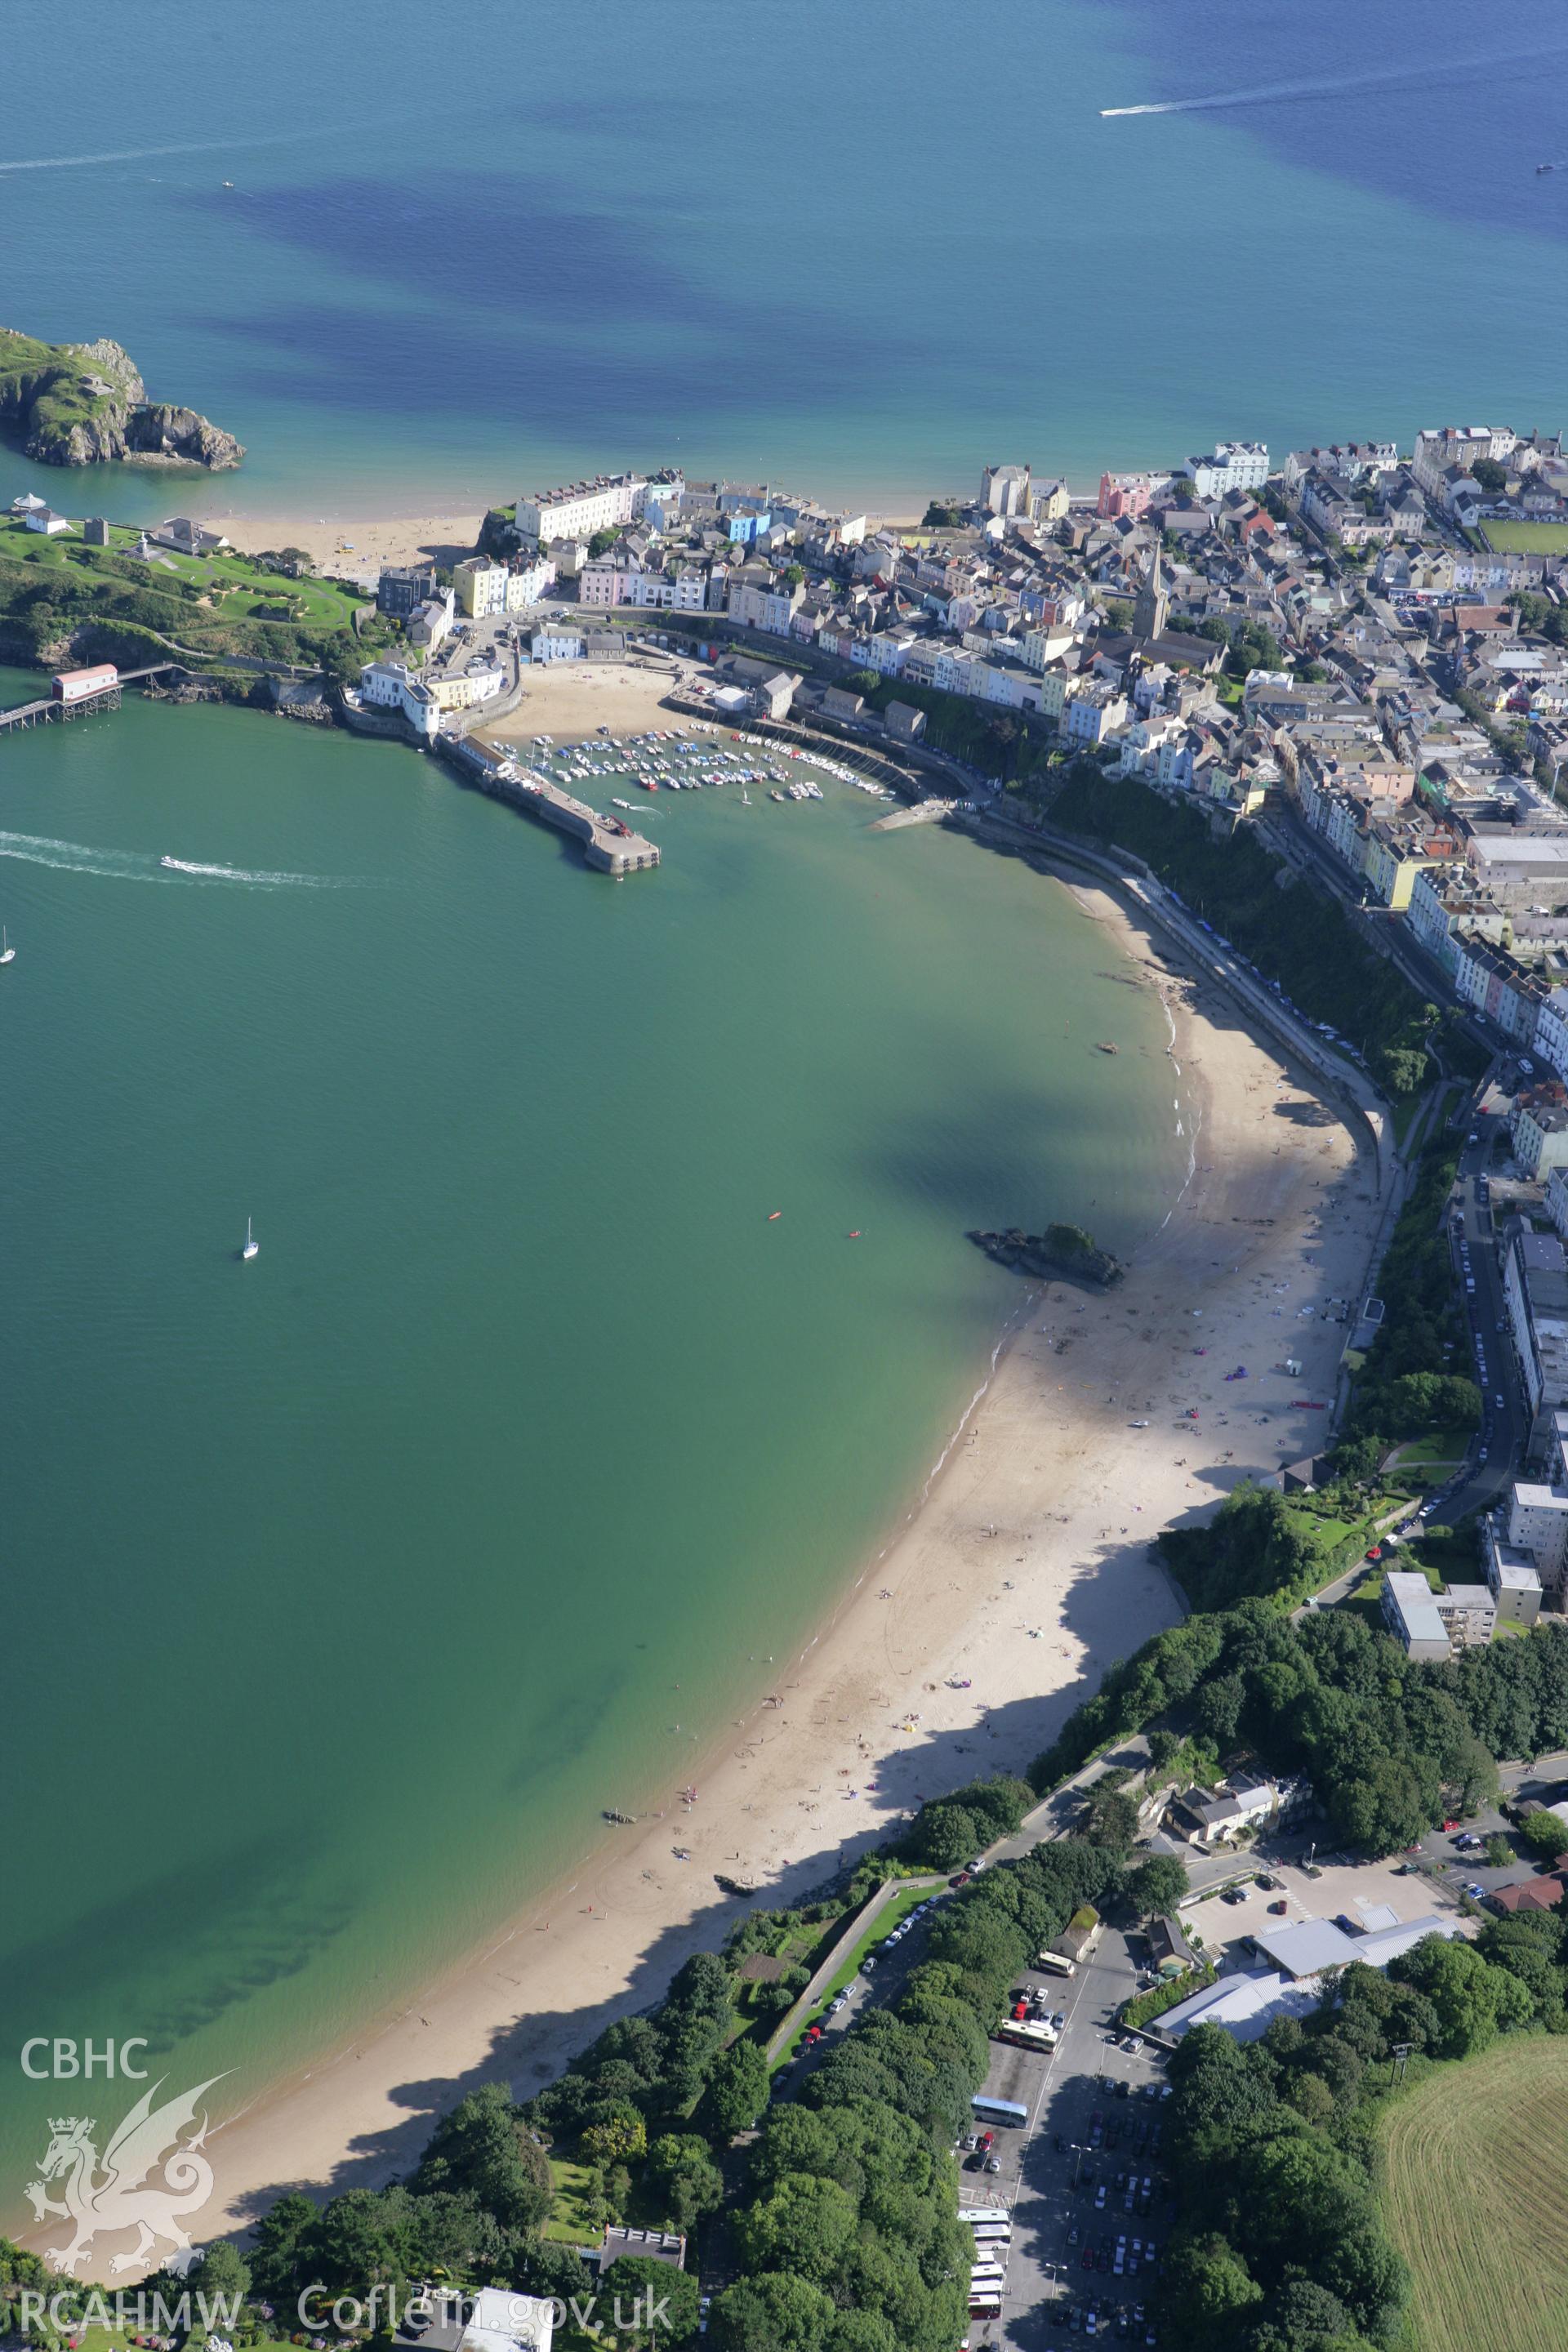 RCAHMW colour oblique aerial photograph of Tenby and surrounding landscape from the north-east. Taken on 30 July 2007 by Toby Driver